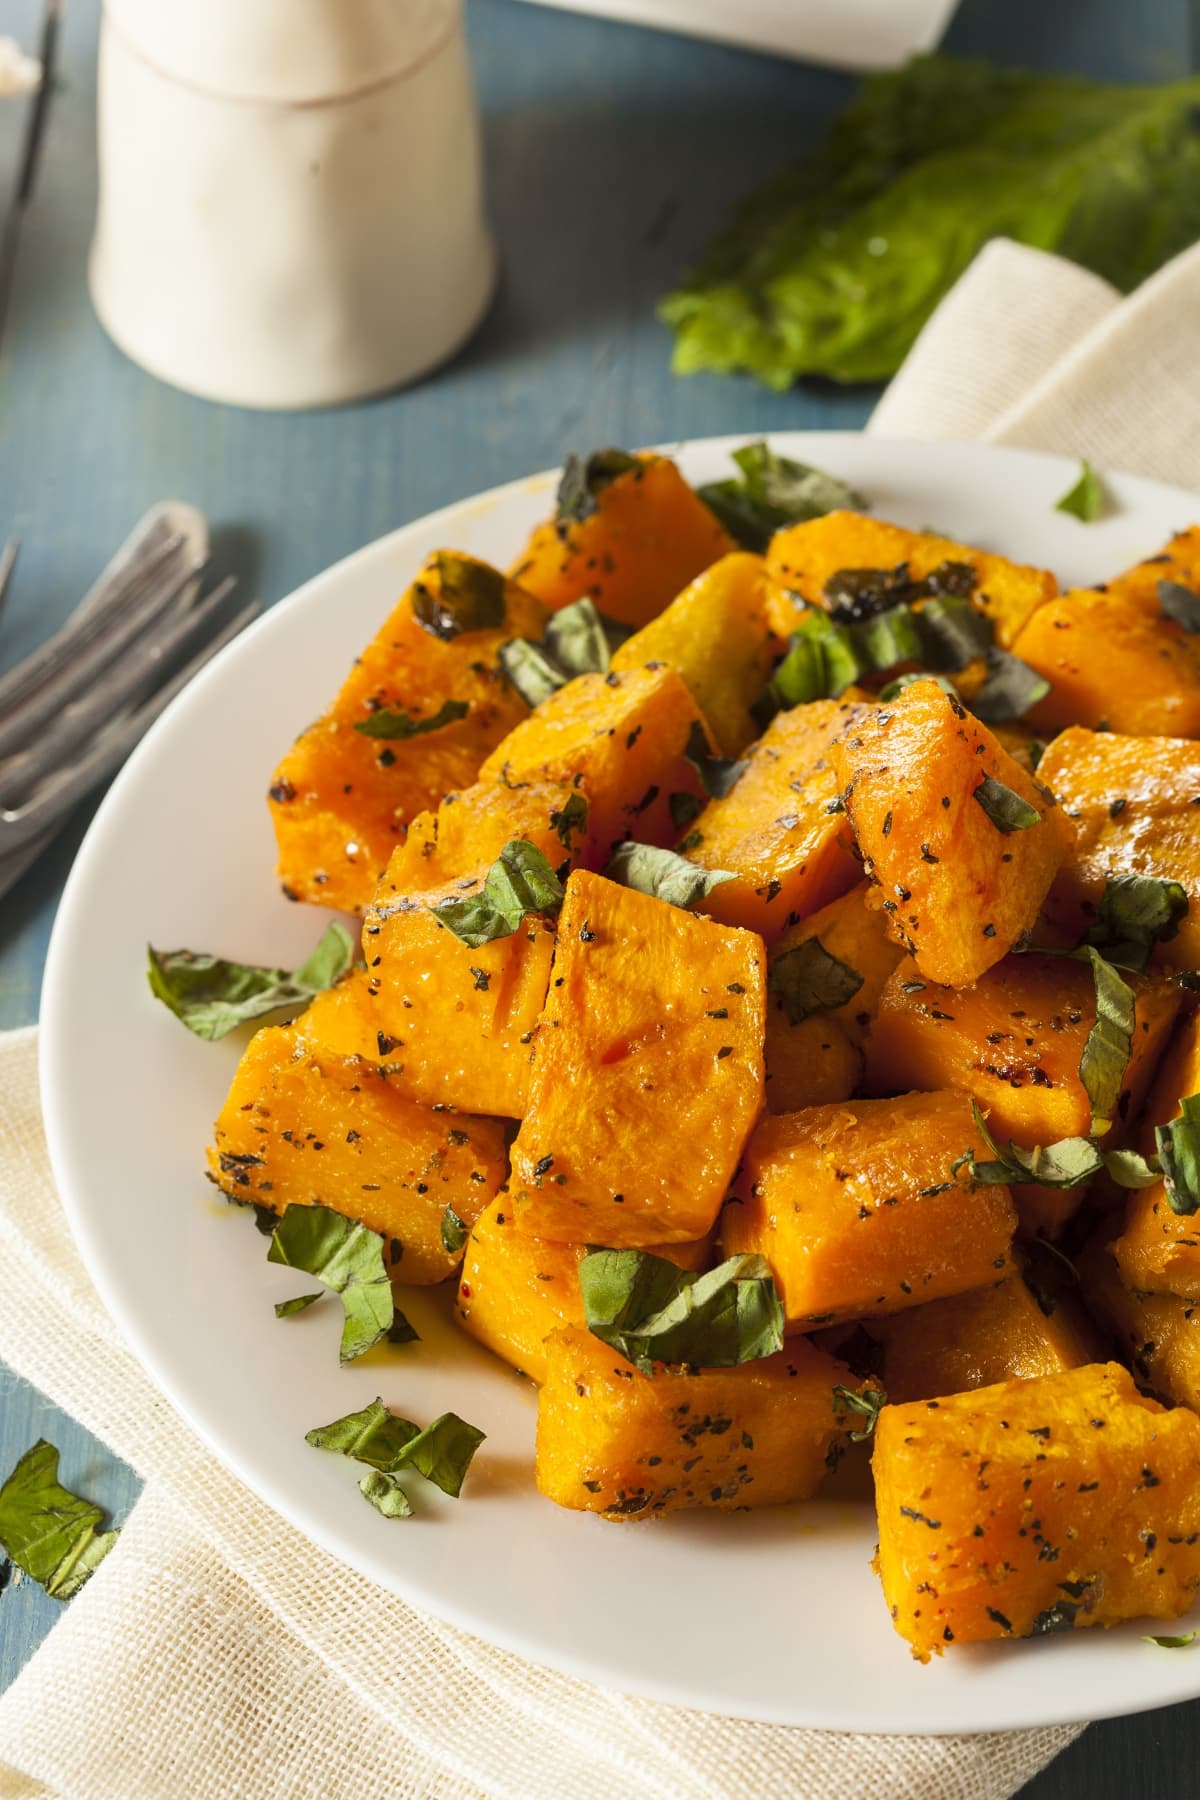 A plate of homemade roasted butternut squash with herbs